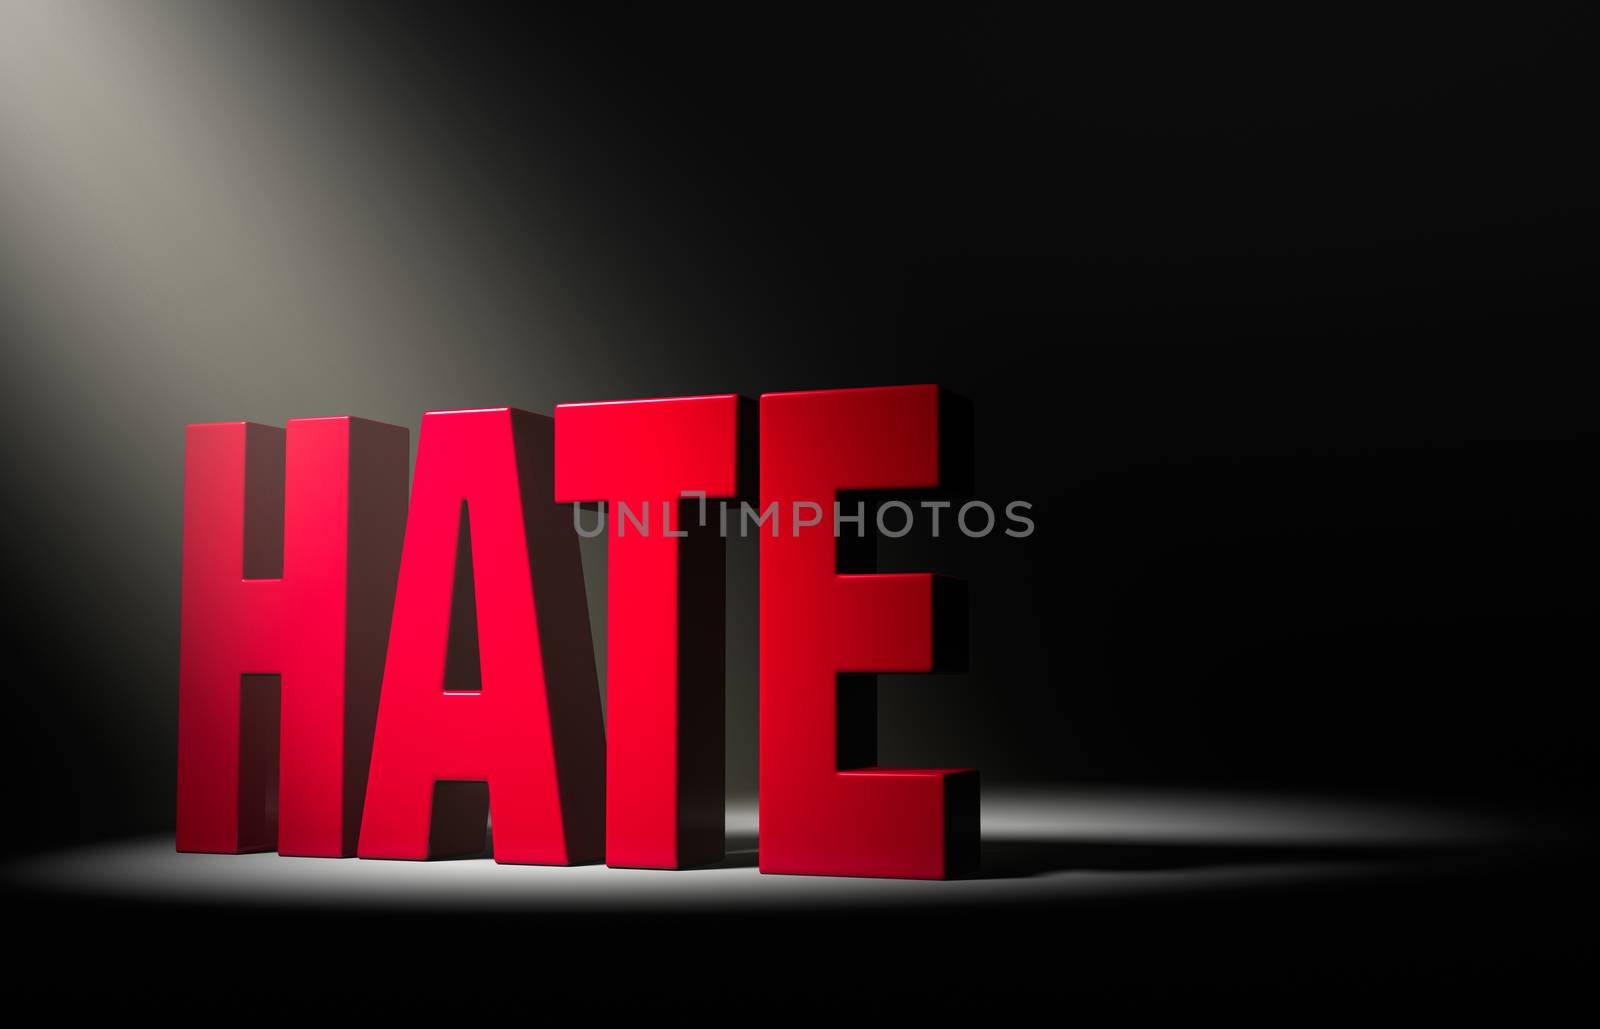 Angled spotlight revealing a large, red "HATE" on a dark background.